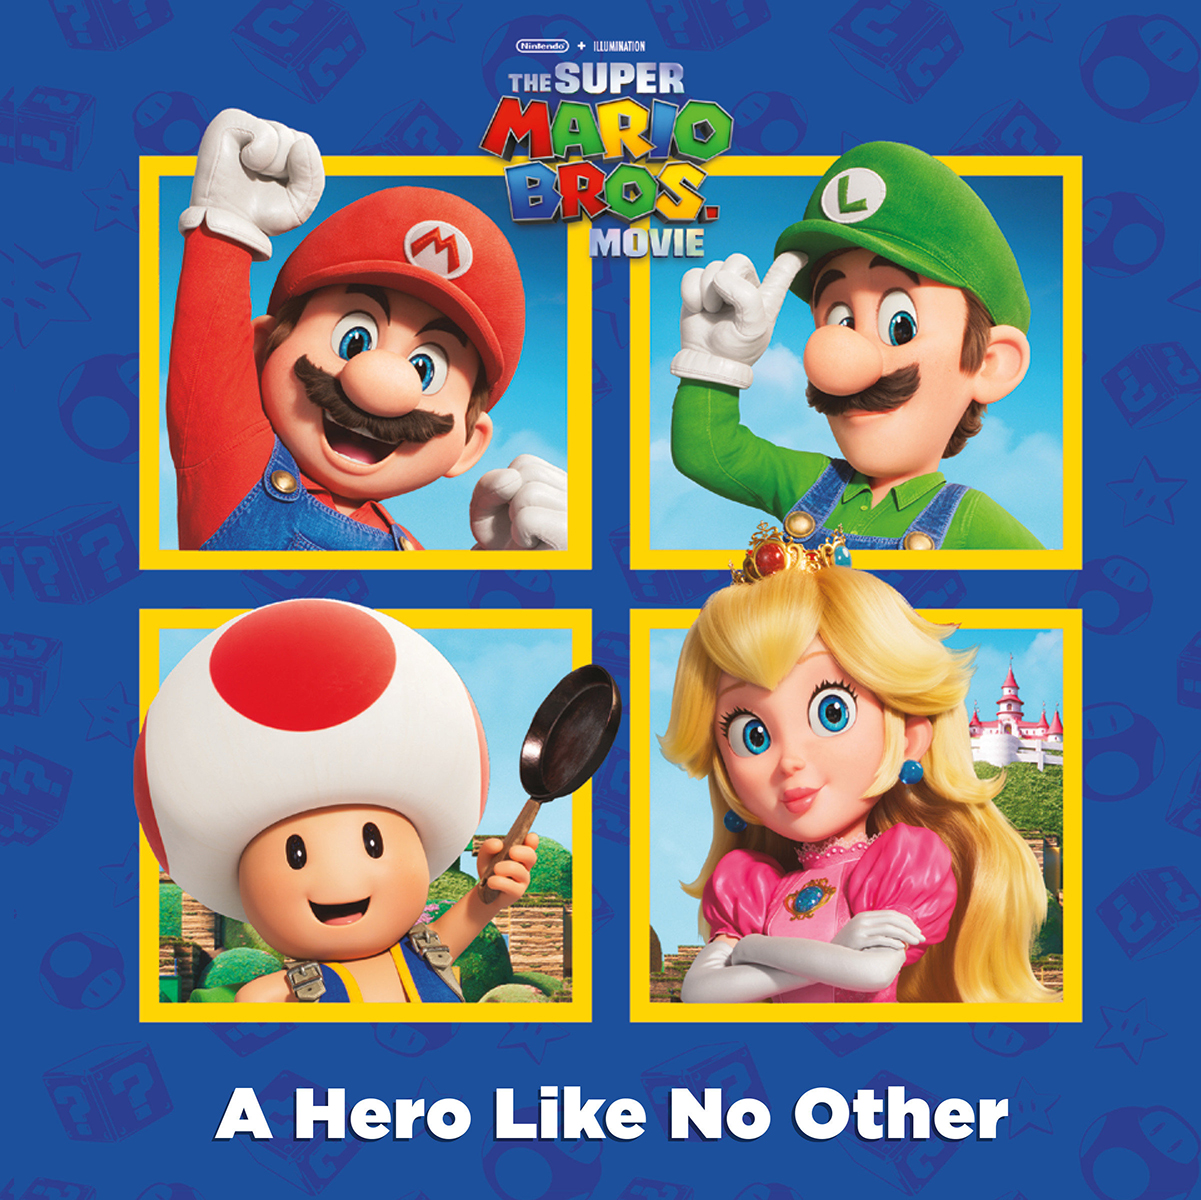  The Super Mario Bros. Movie: A Hero Like No Other 